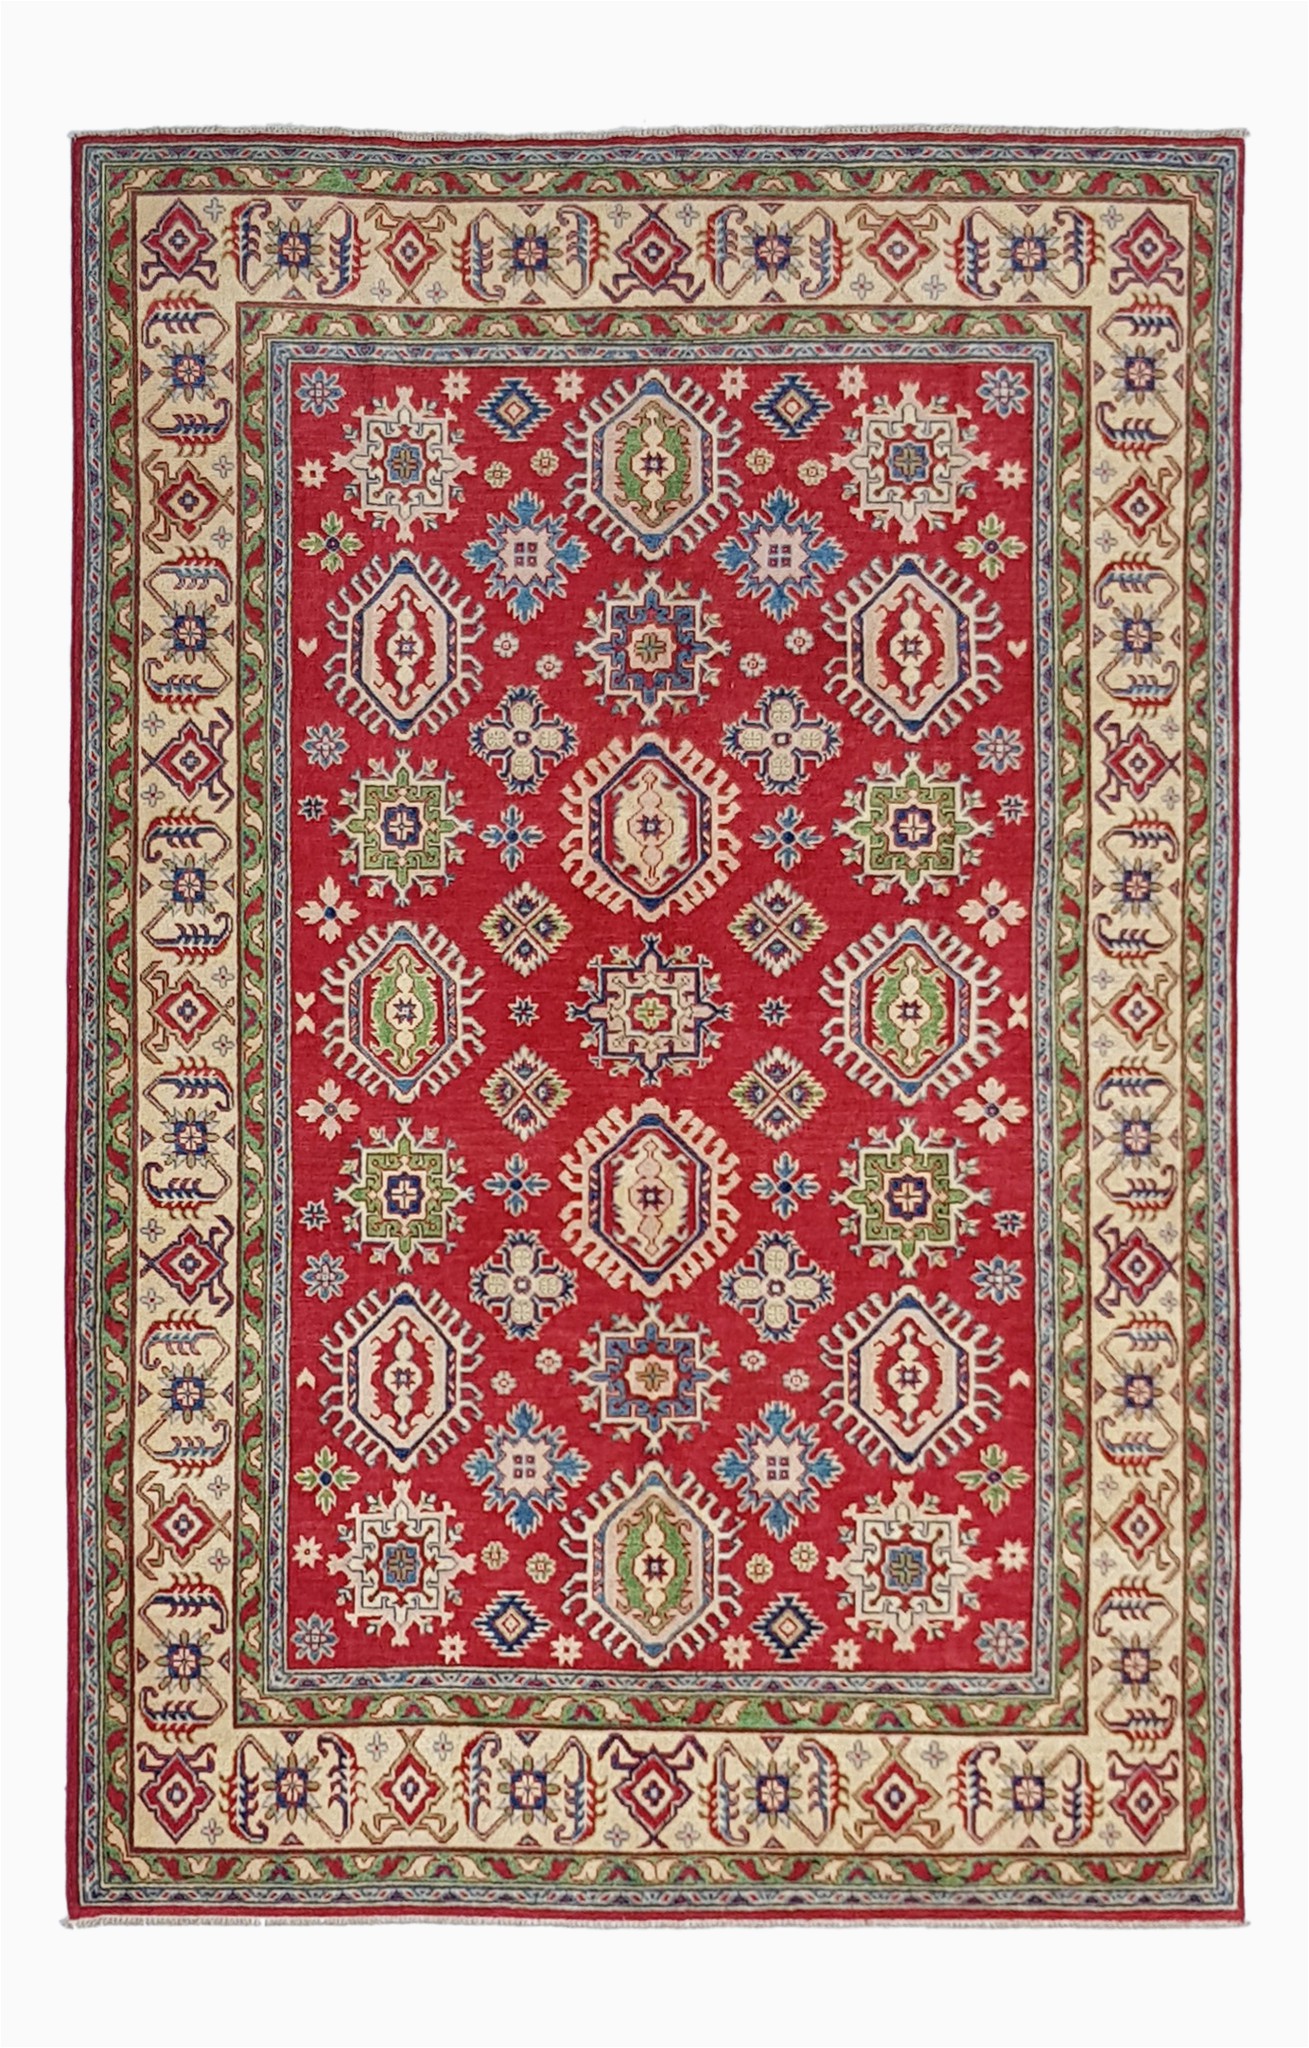 5 by 9 area Rugs Hand Knotted 9 5 X 6 5 Wool Kazak area Rug 290×200 Cm oriental Car